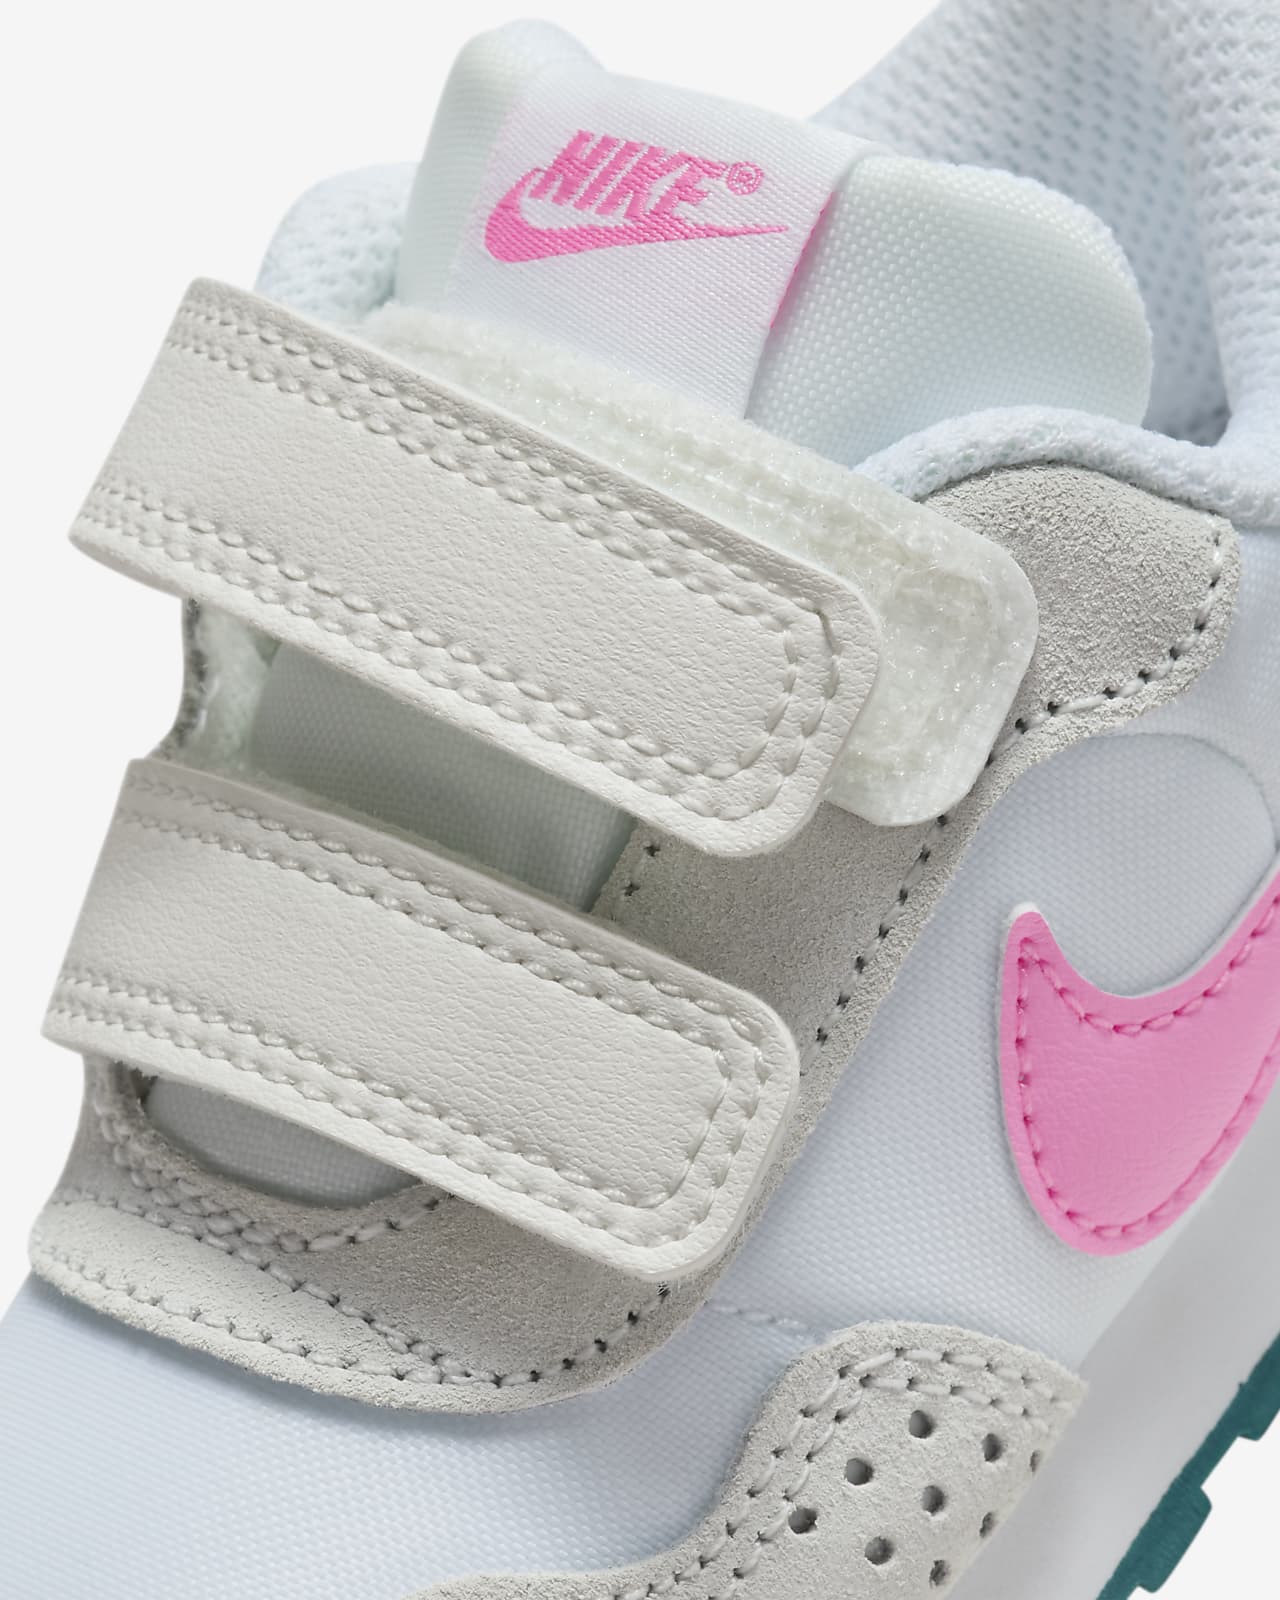 Shoes. Nike Baby/Toddler Valiant MD